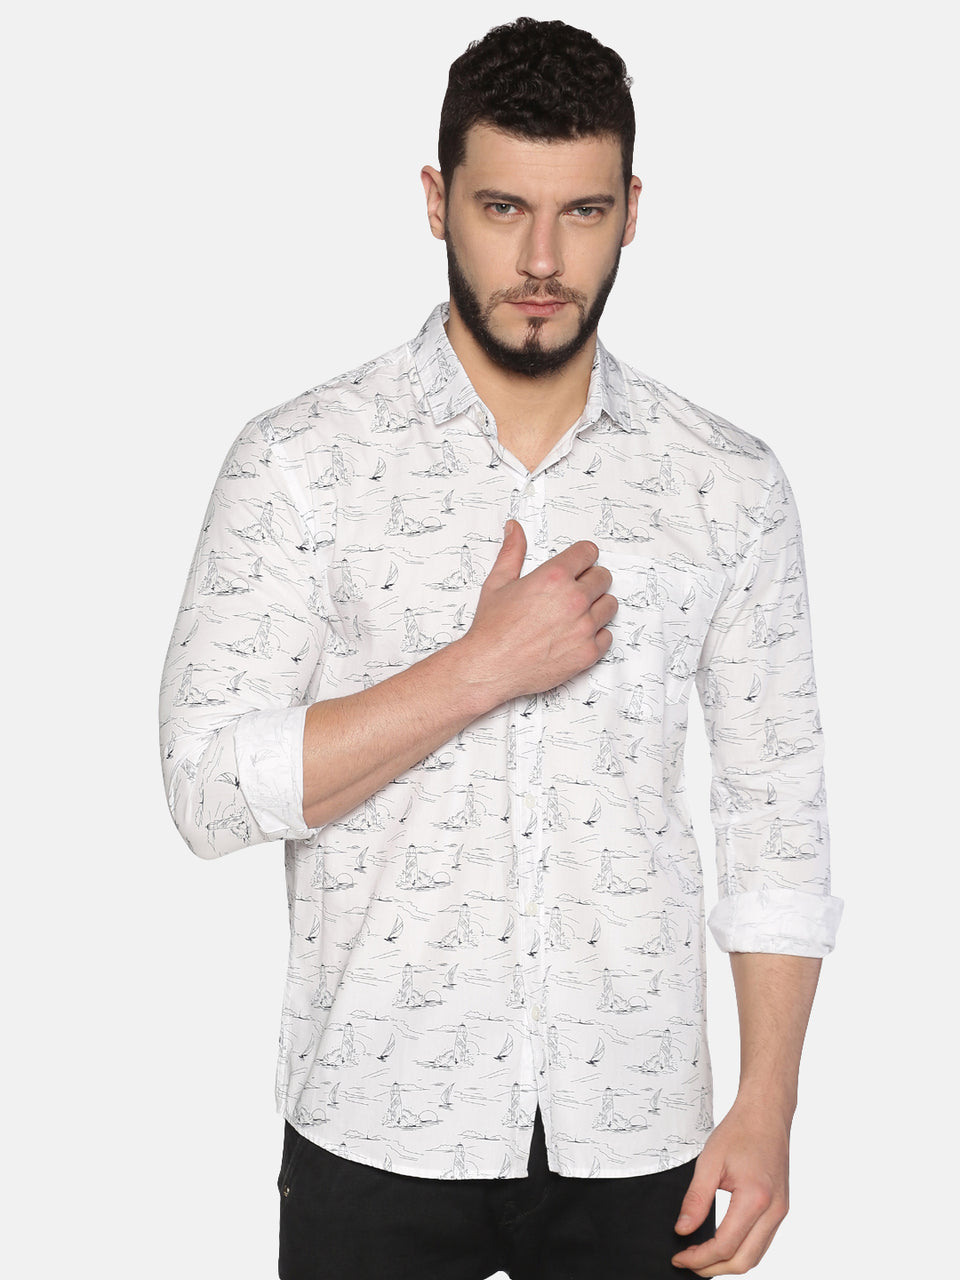 Buy White Shirts for Men Online in India